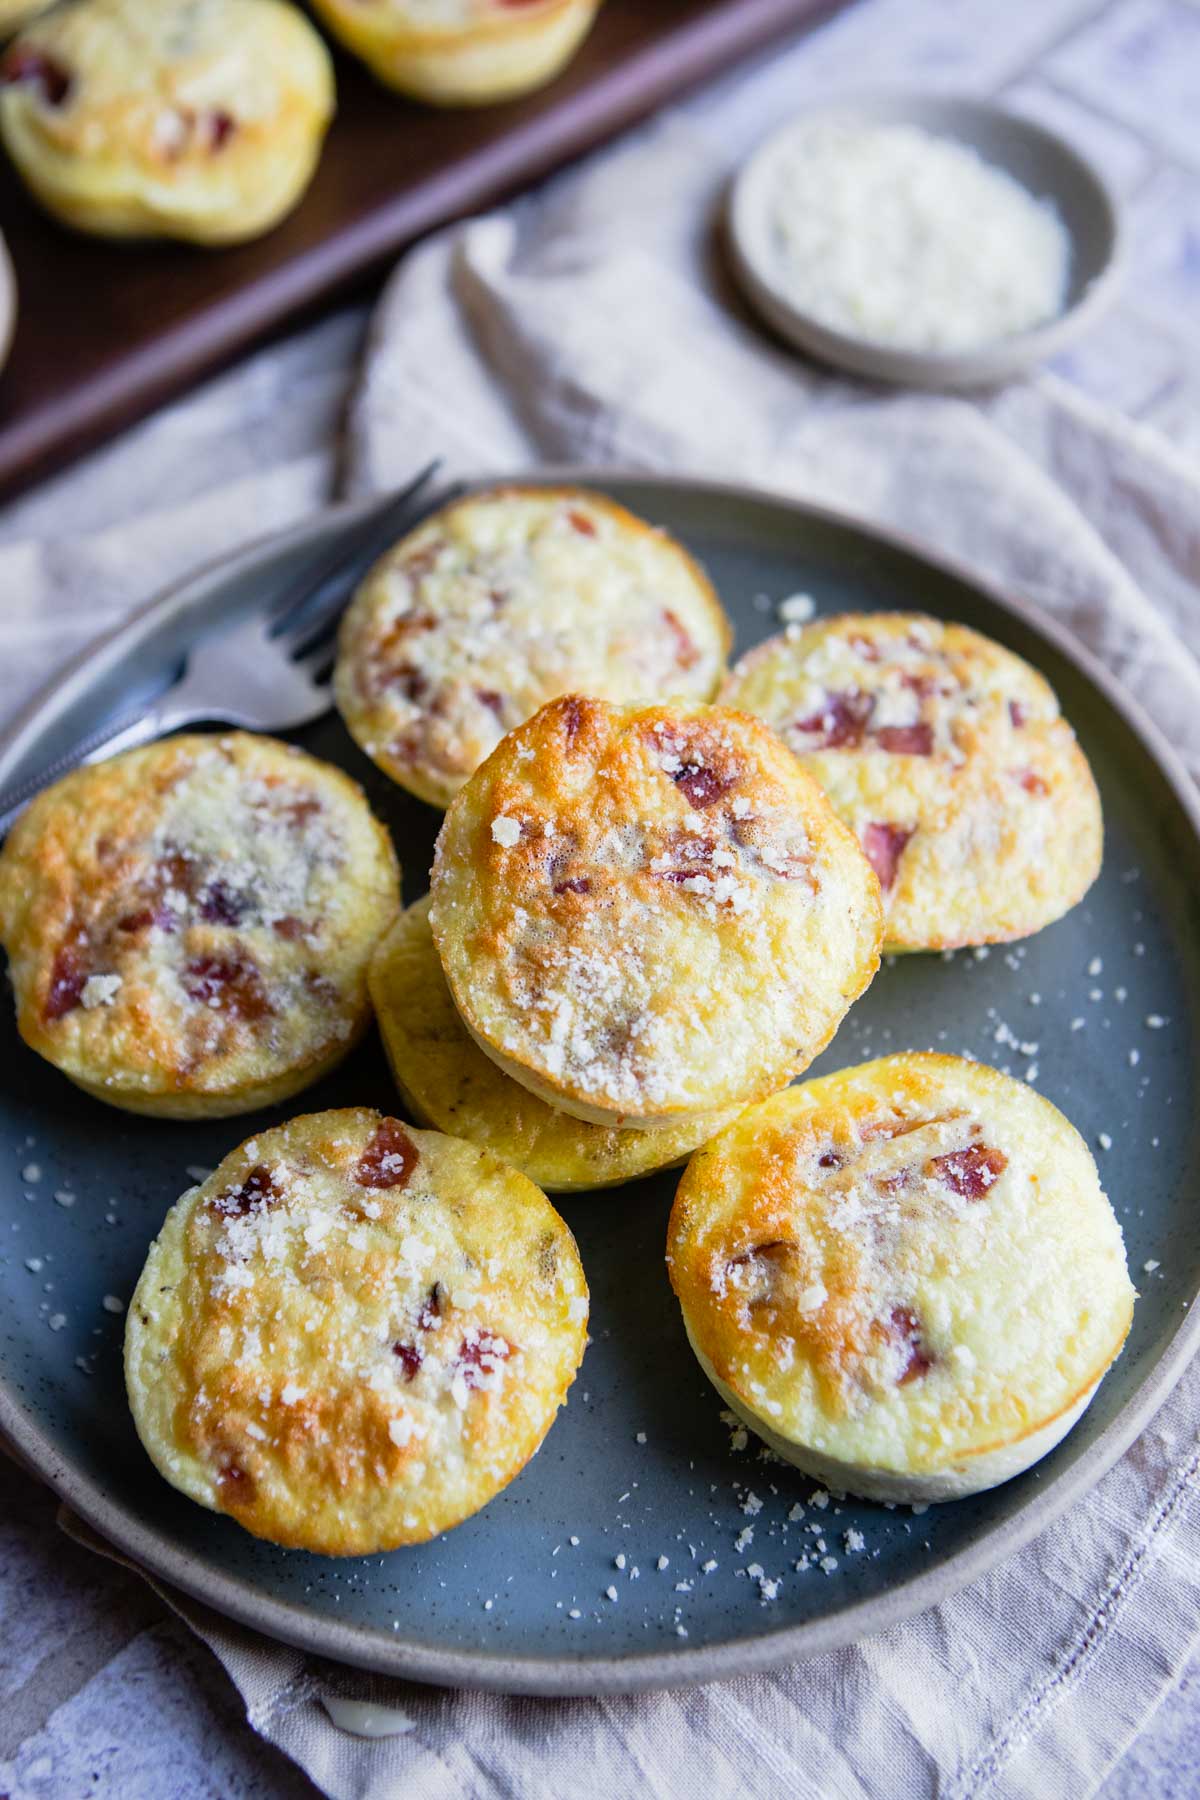 Bacon and Cheese Egg Bites (High Protein Meal Prep)